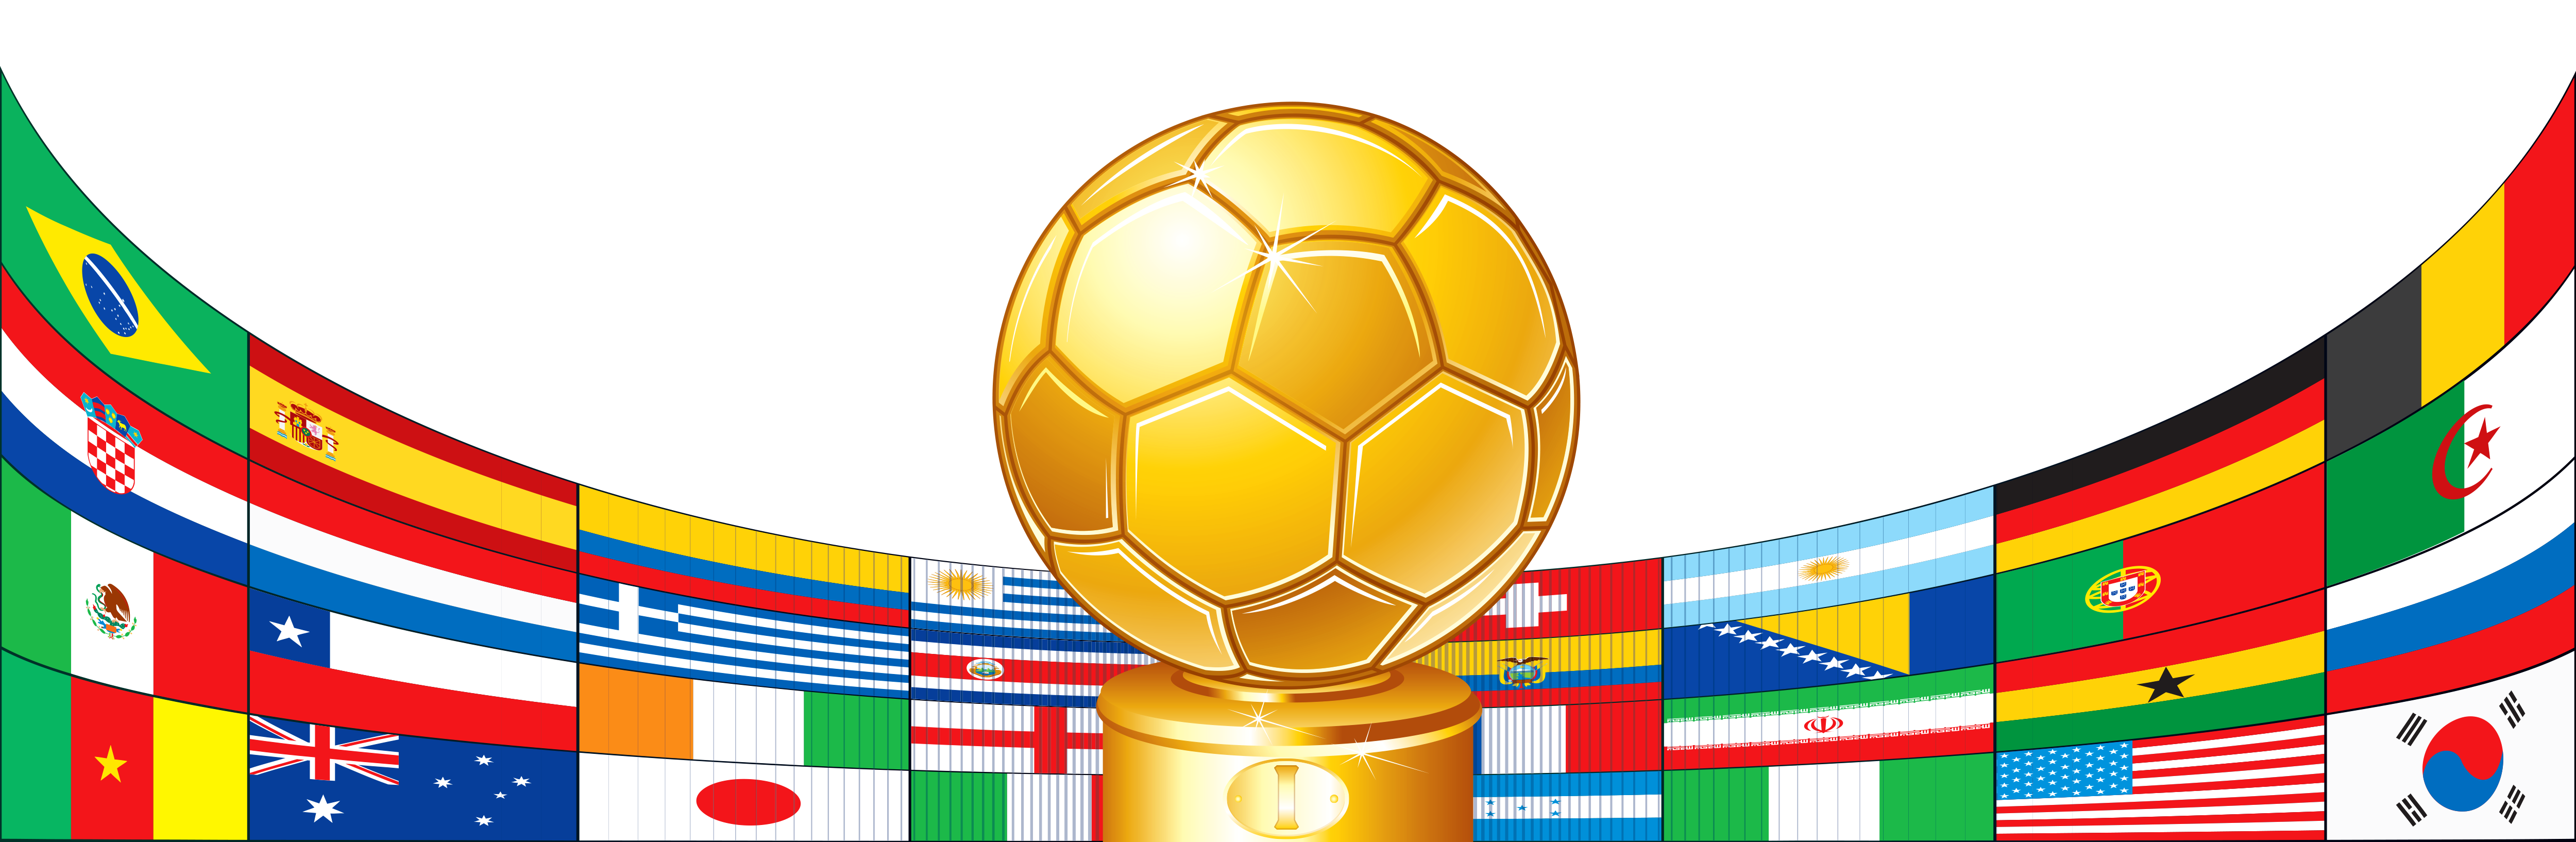 clipart world cup - photo #2